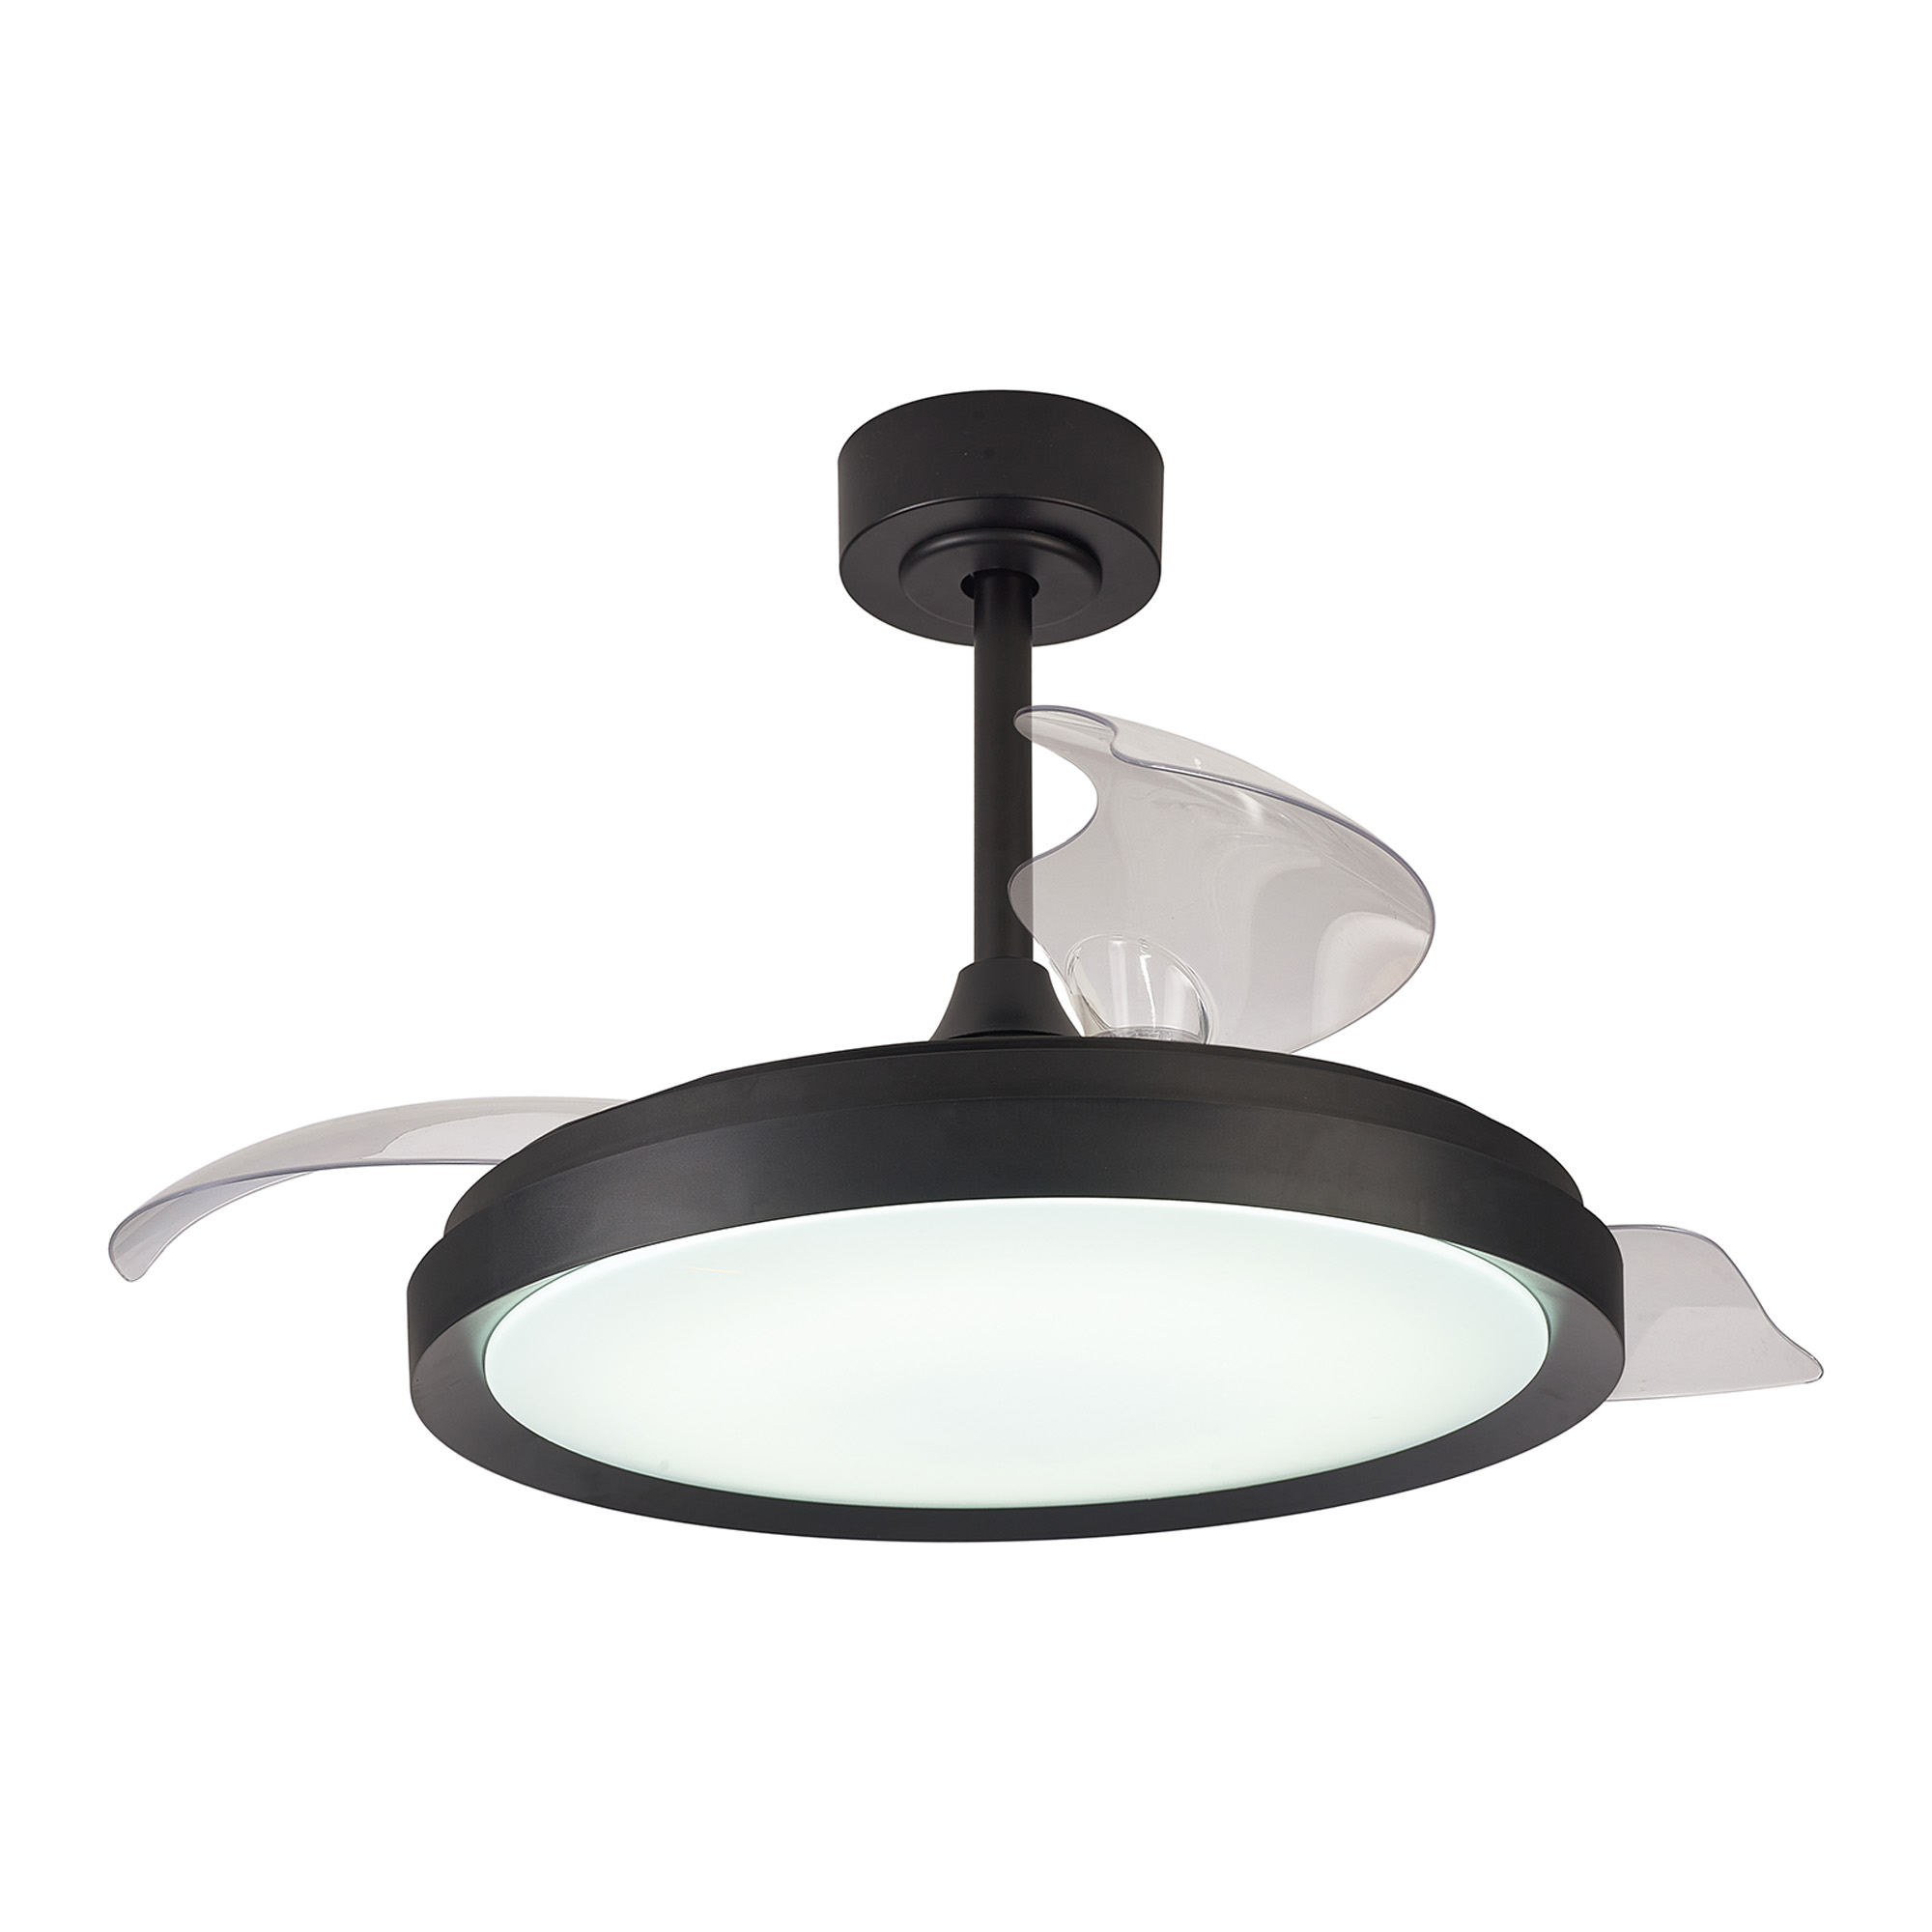 M8828  Mistral 50W LED Dimmable Ceiling Light With Built-In 30W DC Fan, 2700-5000K Remote Control, Black